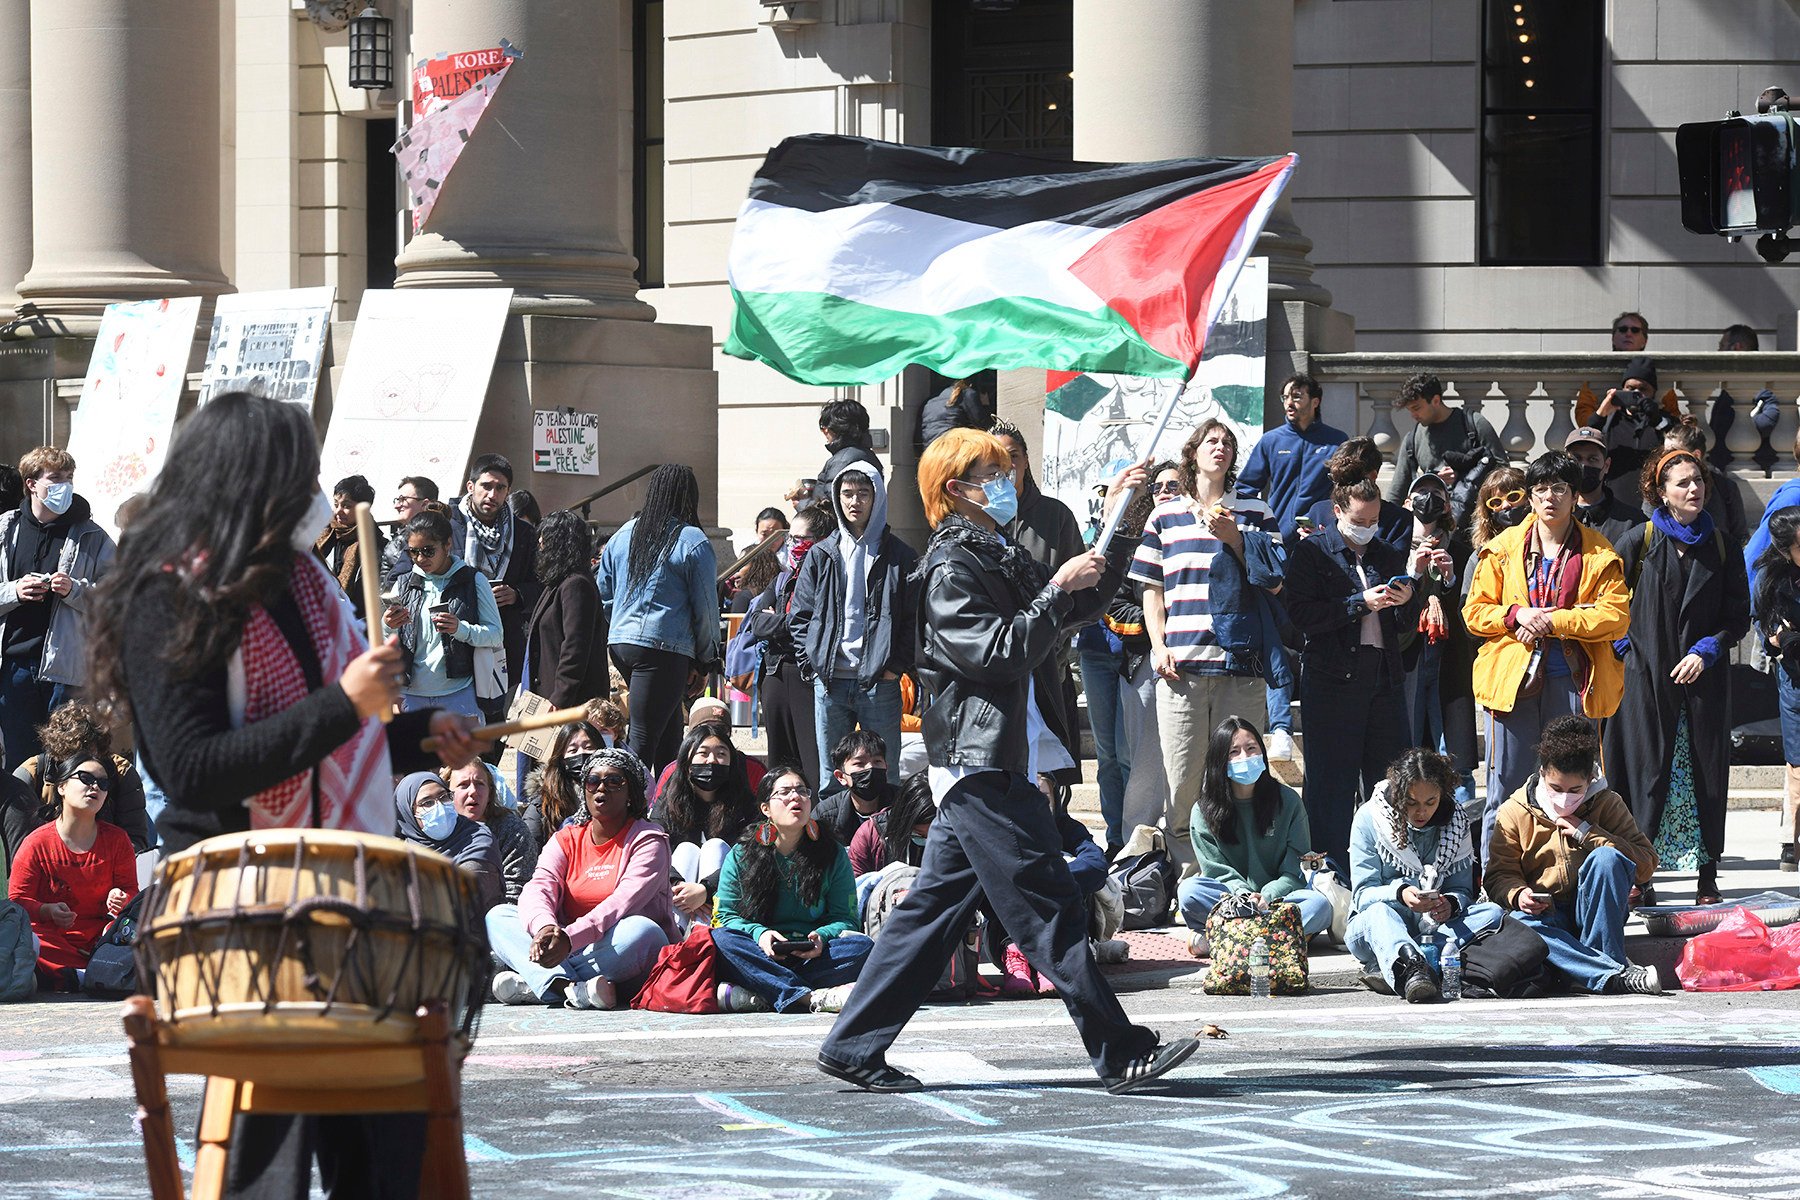 Several hundred students and pro-Palestinian supporters rally at Yale University on Monday. Photo: Ned Gerard/Hearst Connecticut Media via AP